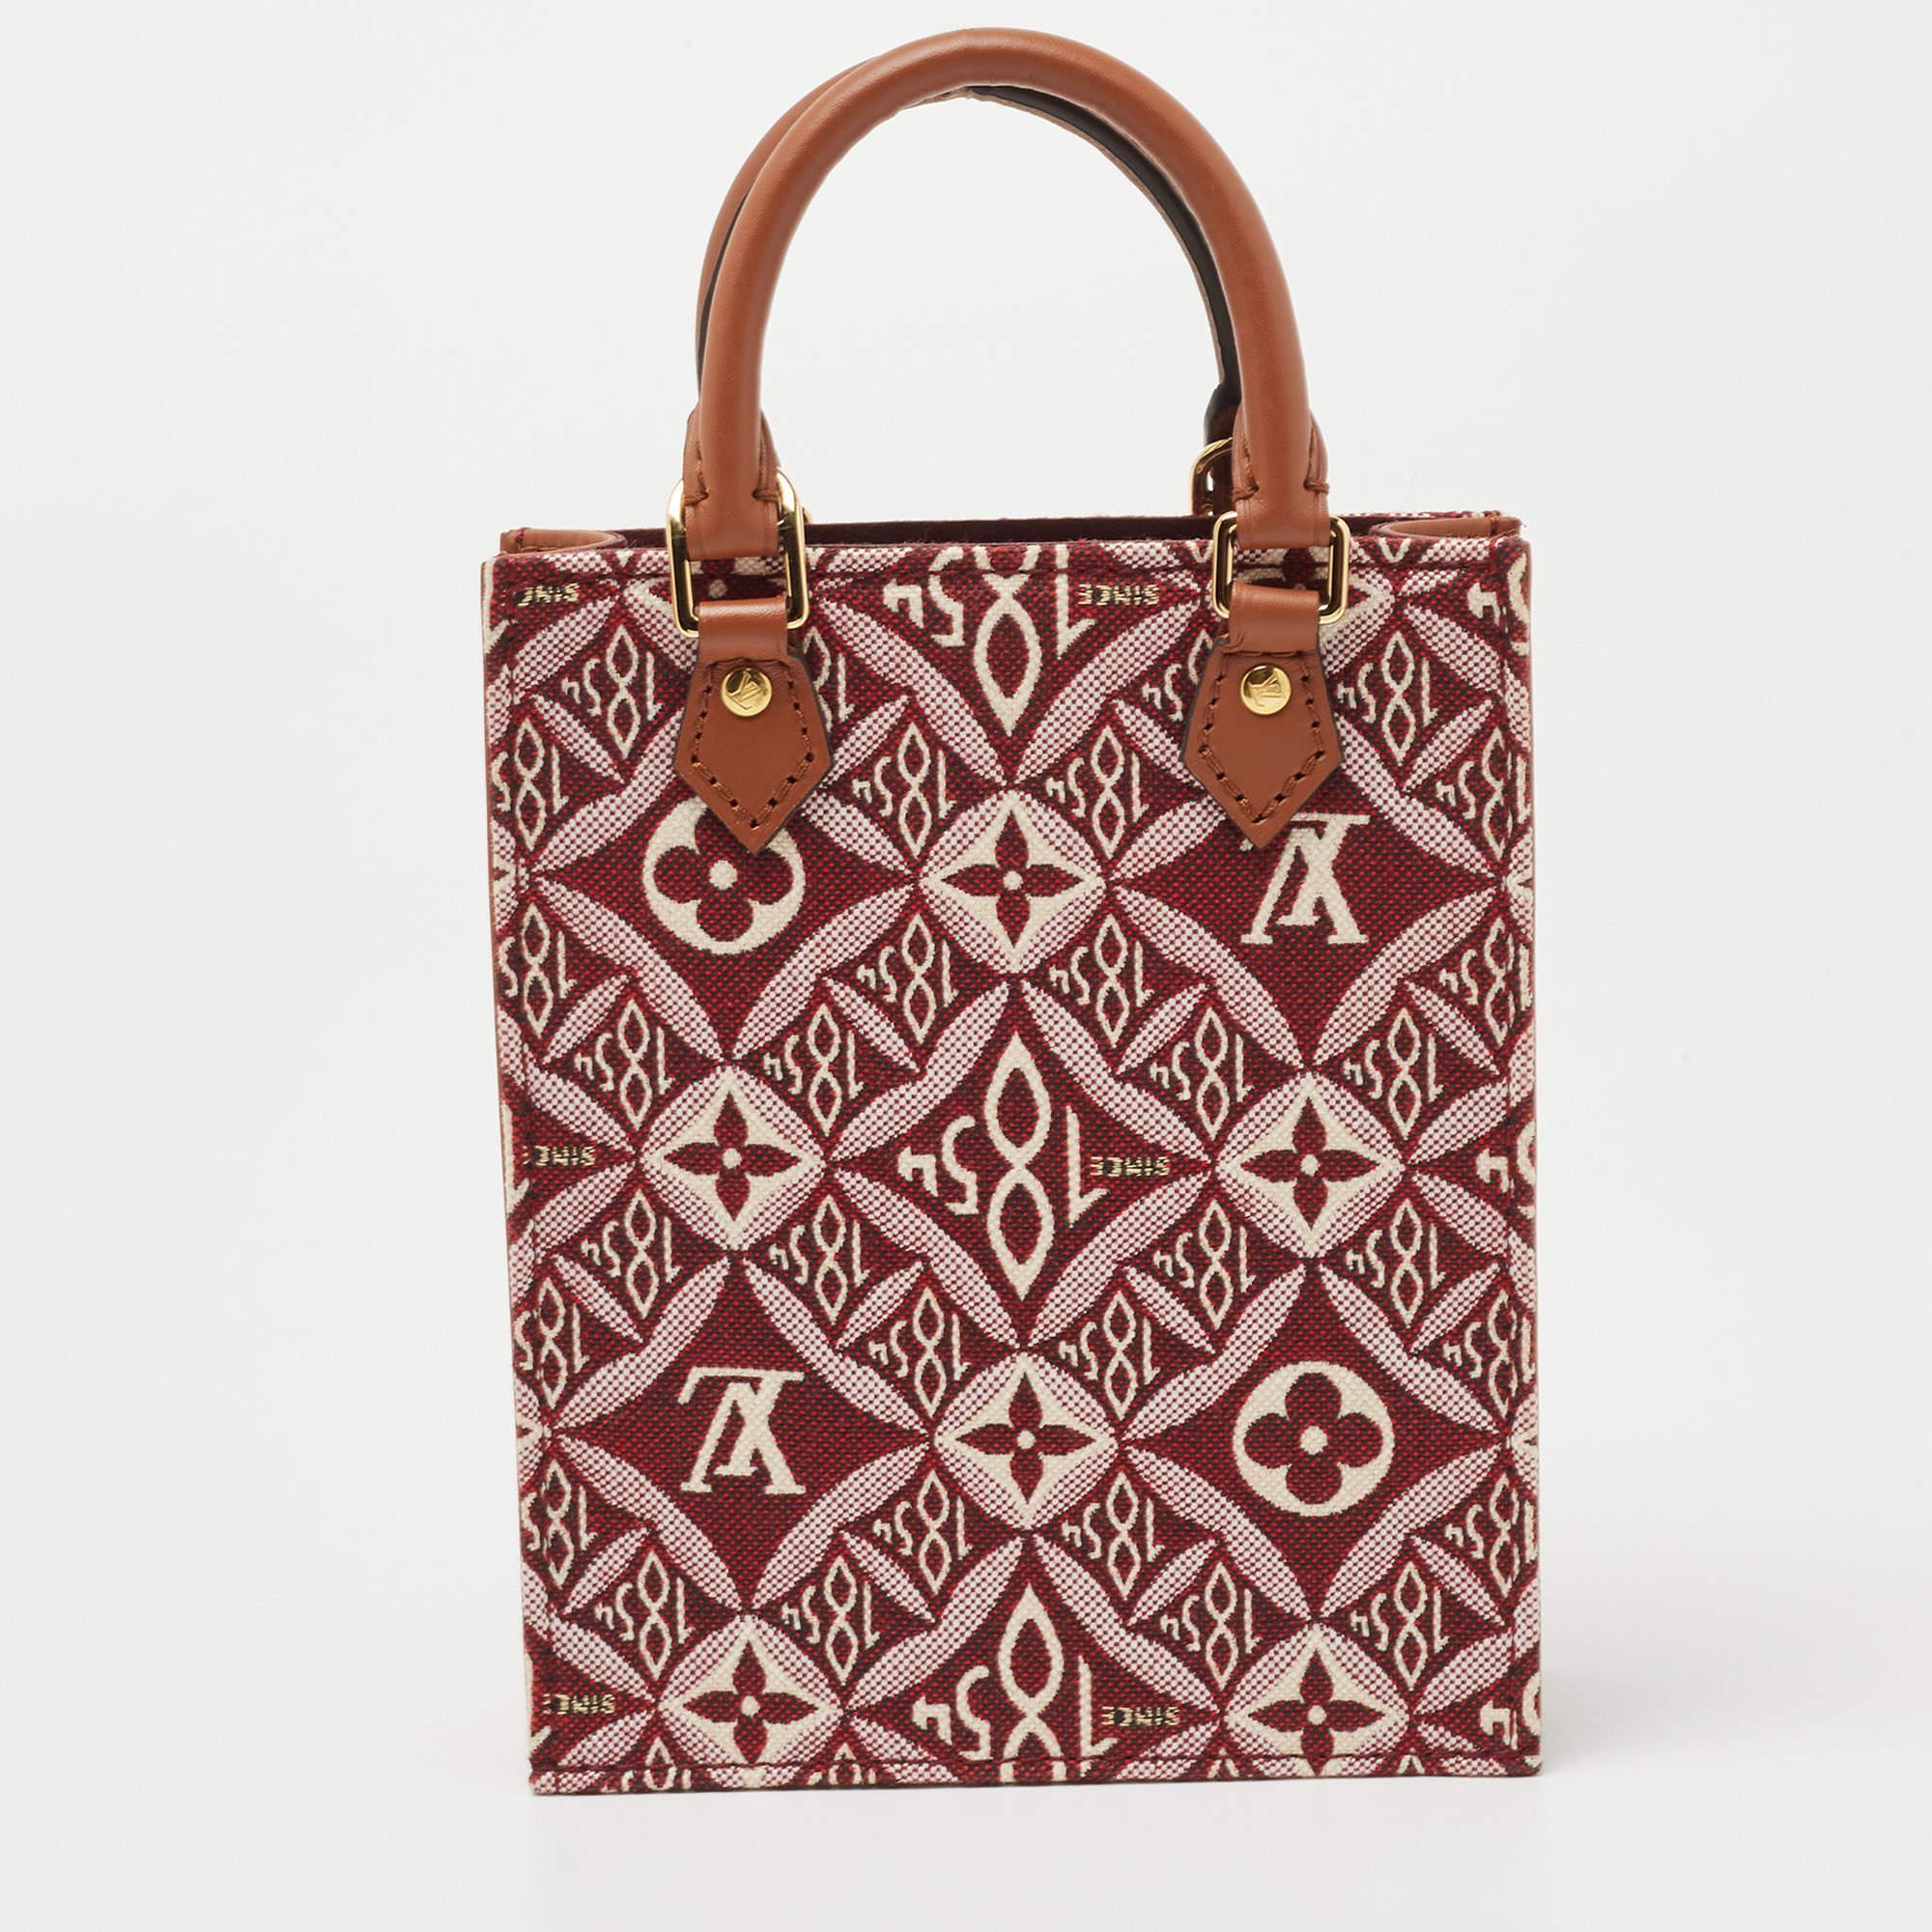 It's no secret that Louis Vuitton makes bags that are exquisite and everlasting. Included in the brand's long list of beautiful bags is this Sac Plat. This statement bag comes crafted from jacquard and leather into a structured shape with dual